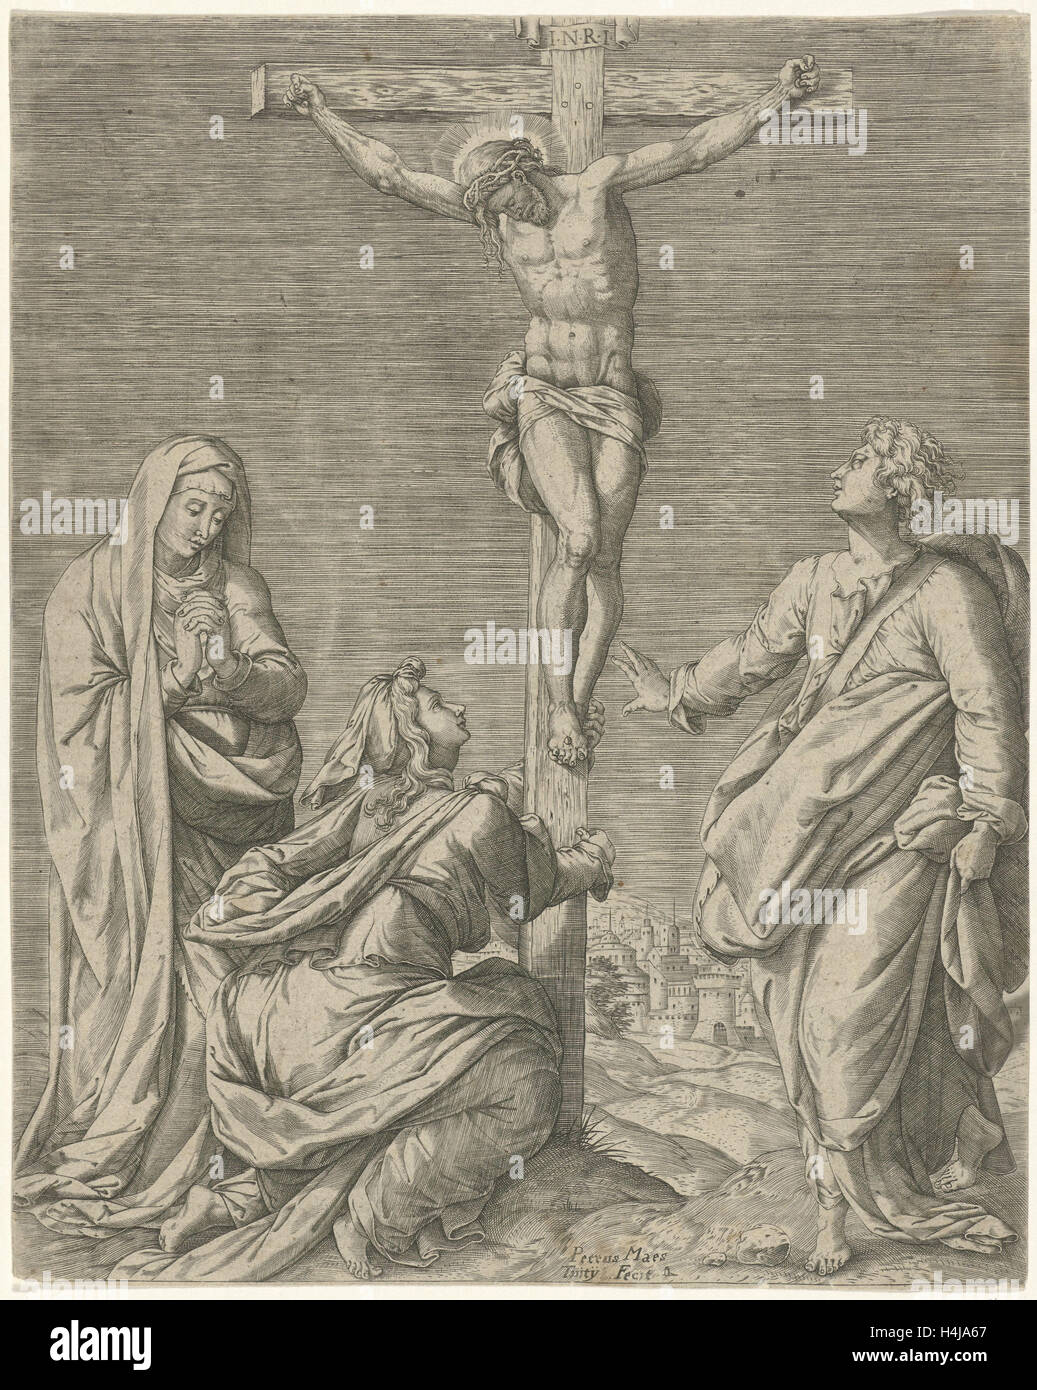 Crucifixion of Christ, Pieter Maes, 1577 - 1591 Stock Photo